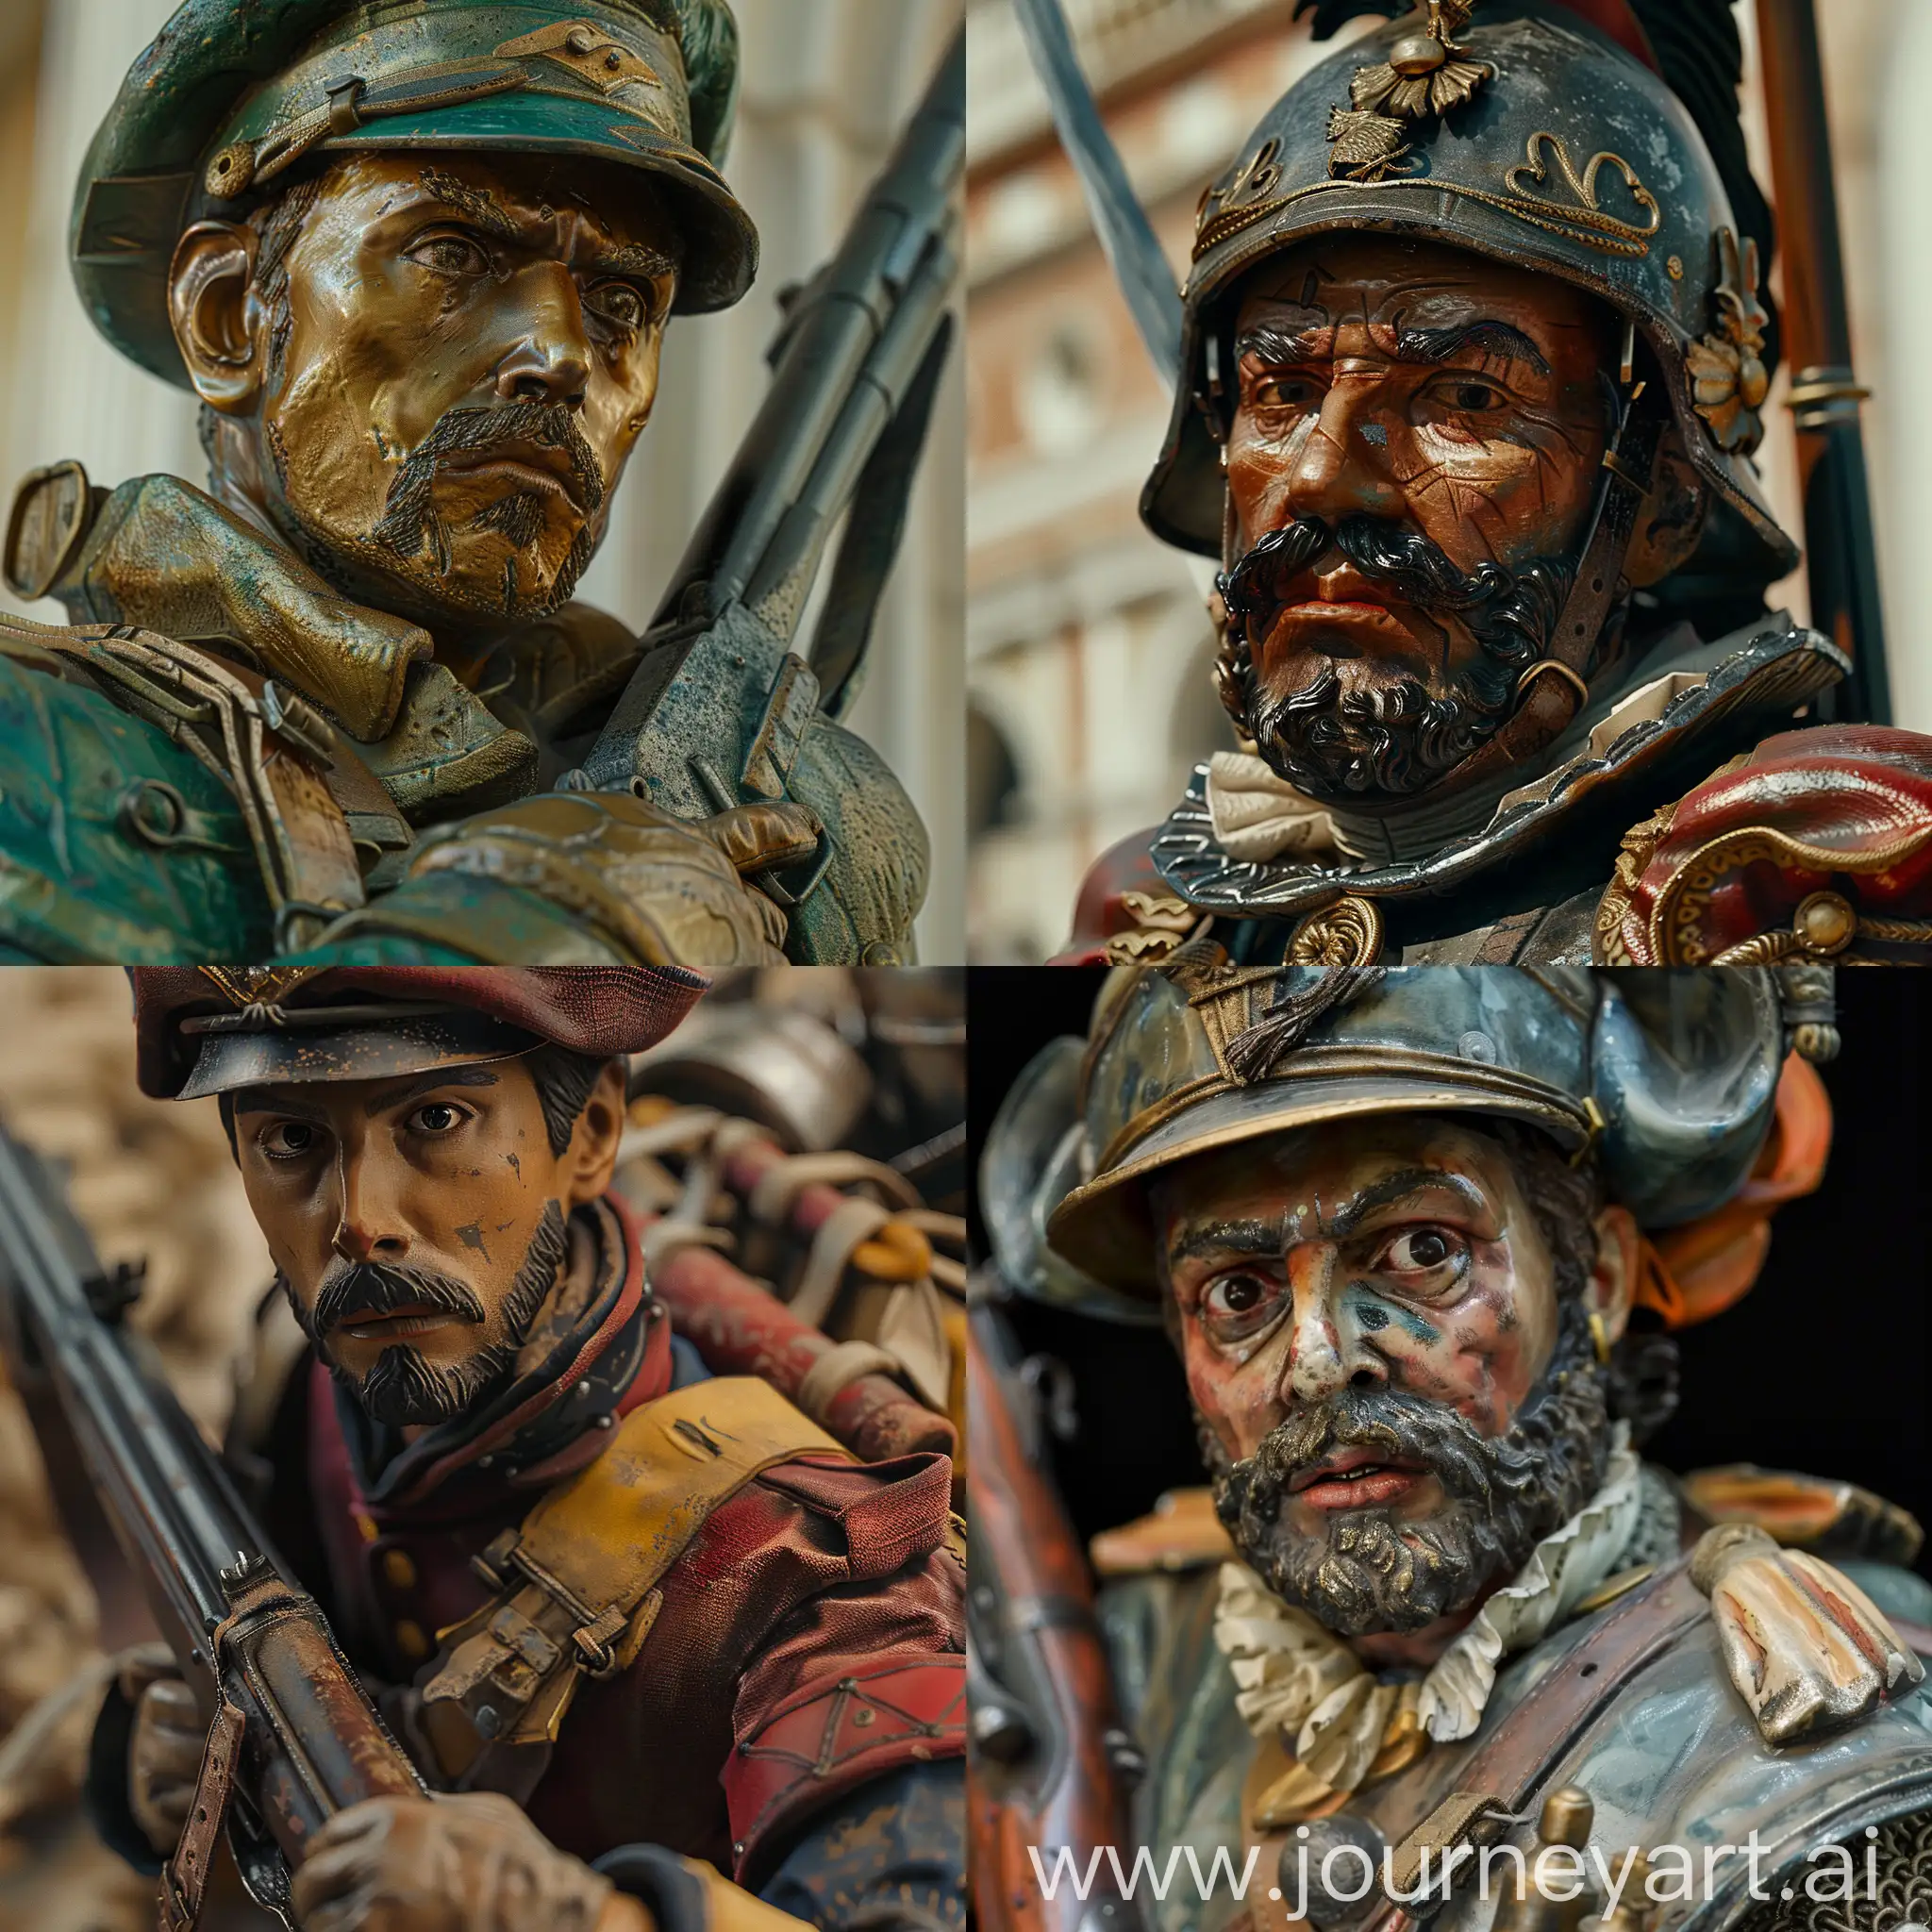 Realistic-Ceramic-Statue-of-20th-Century-Spanish-Army-Legionnaire-with-Rifle-and-Equipment